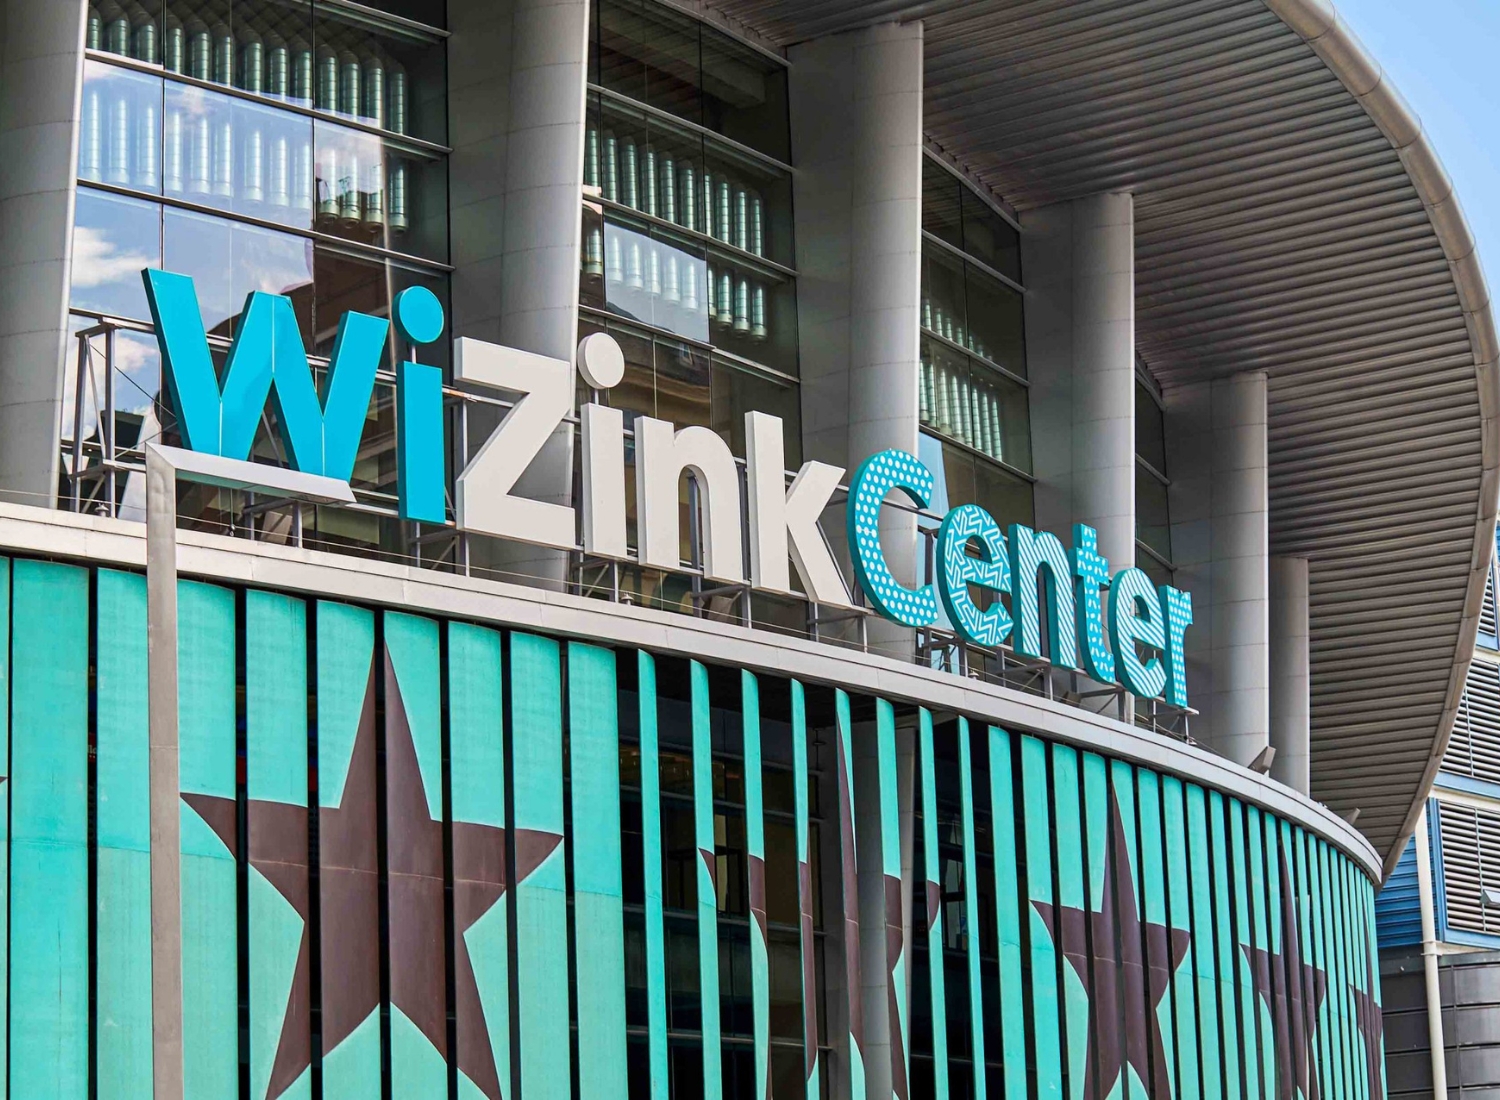 17-astounding-facts-about-wizink-center